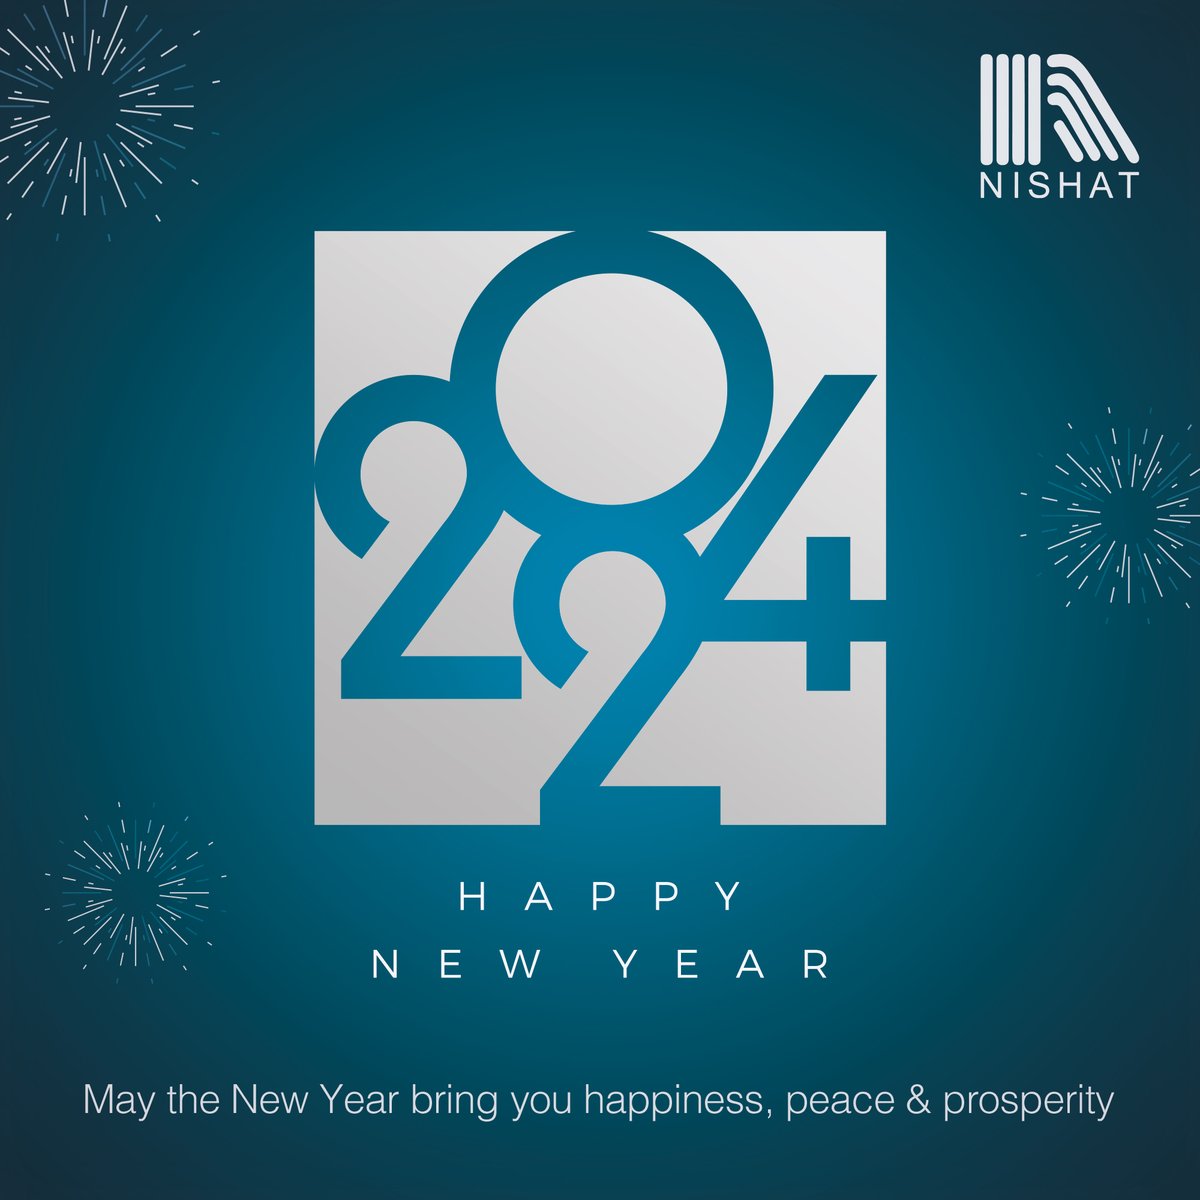 As we step into the promising journey of a new year, let's celebrate resilience, growth and shared success. Wishing everyone a year ahead filled with prosperity and happiness. Happy New Year! #NishatGroup #NewBeginnings